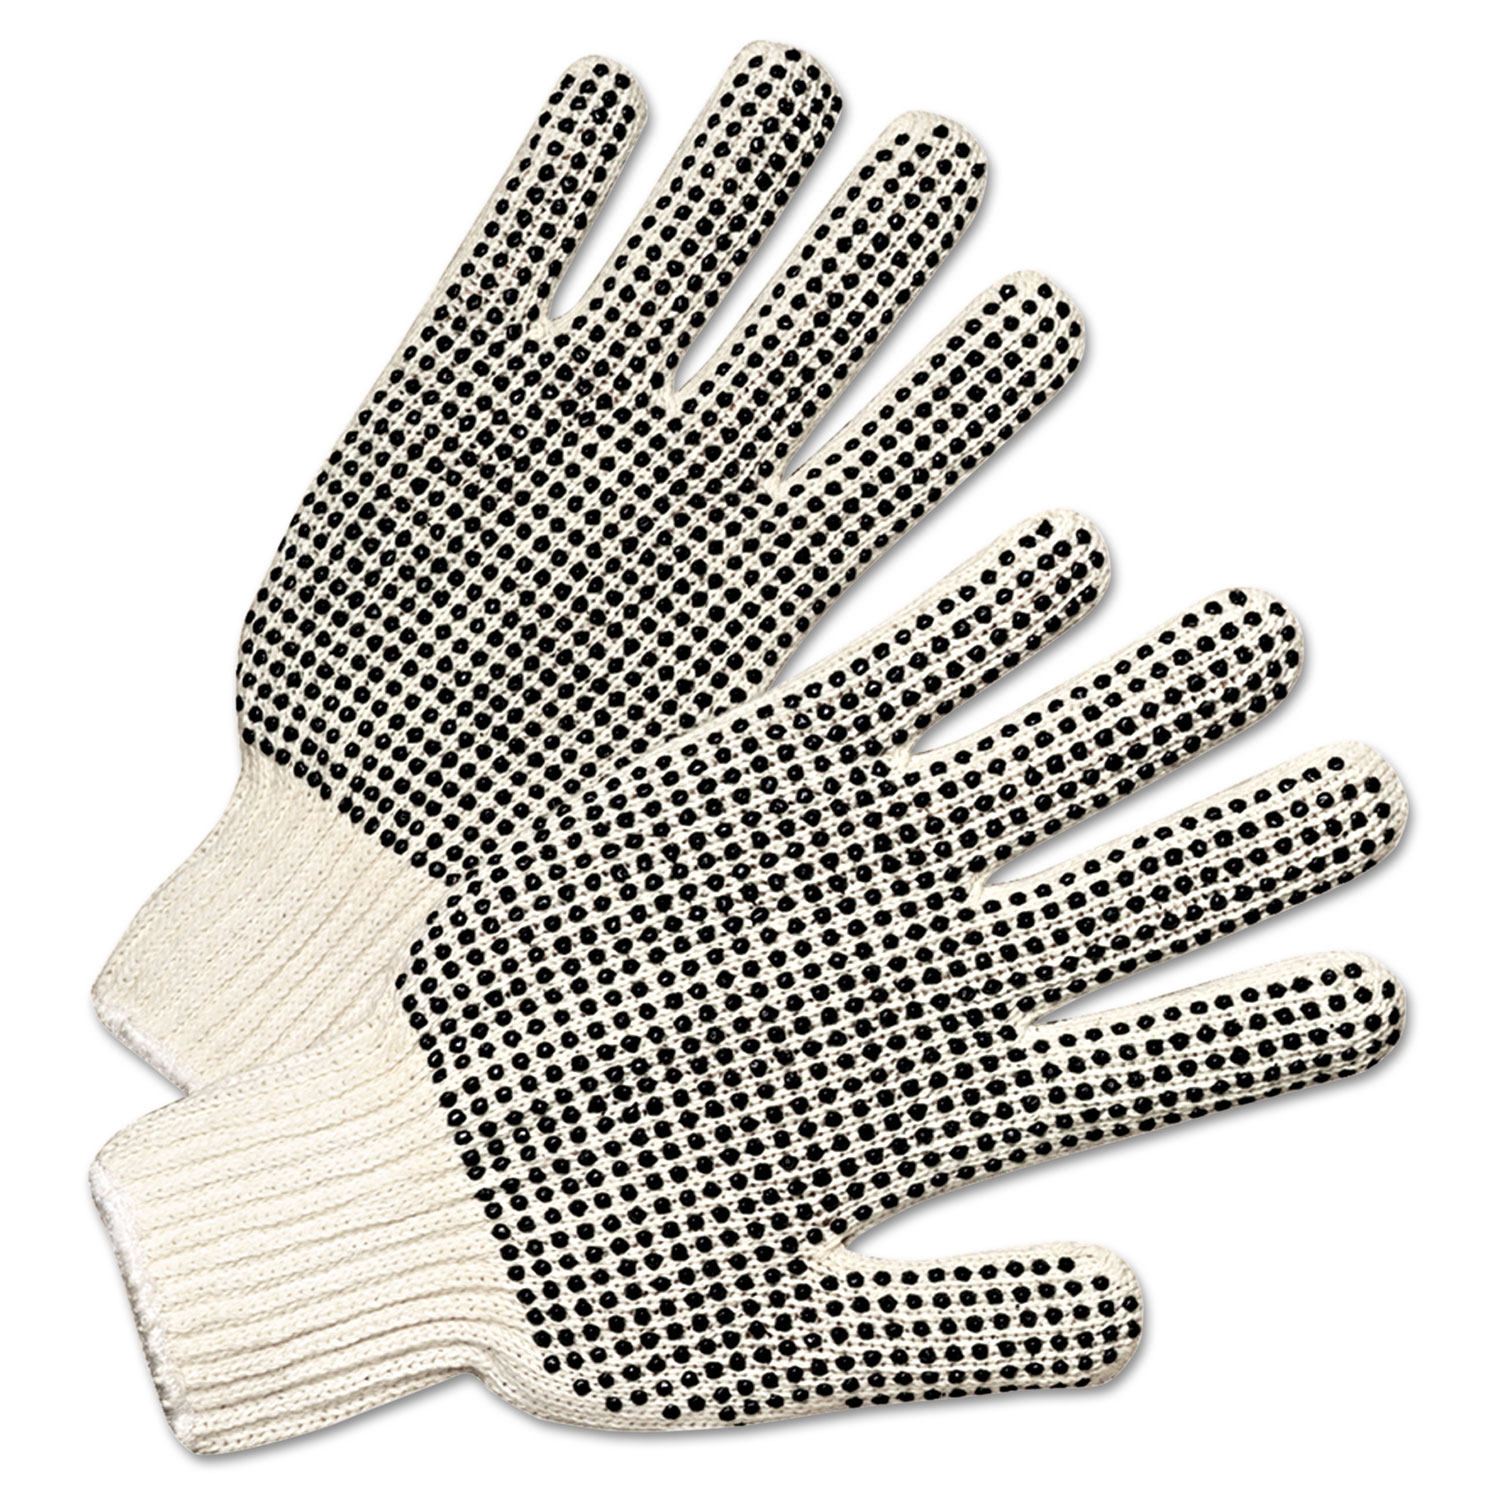  Anchor Brand 708SKBS PVC-Dotted String Knit Gloves, Natural White/Black, Large, 12 Pairs (ANR6705) 